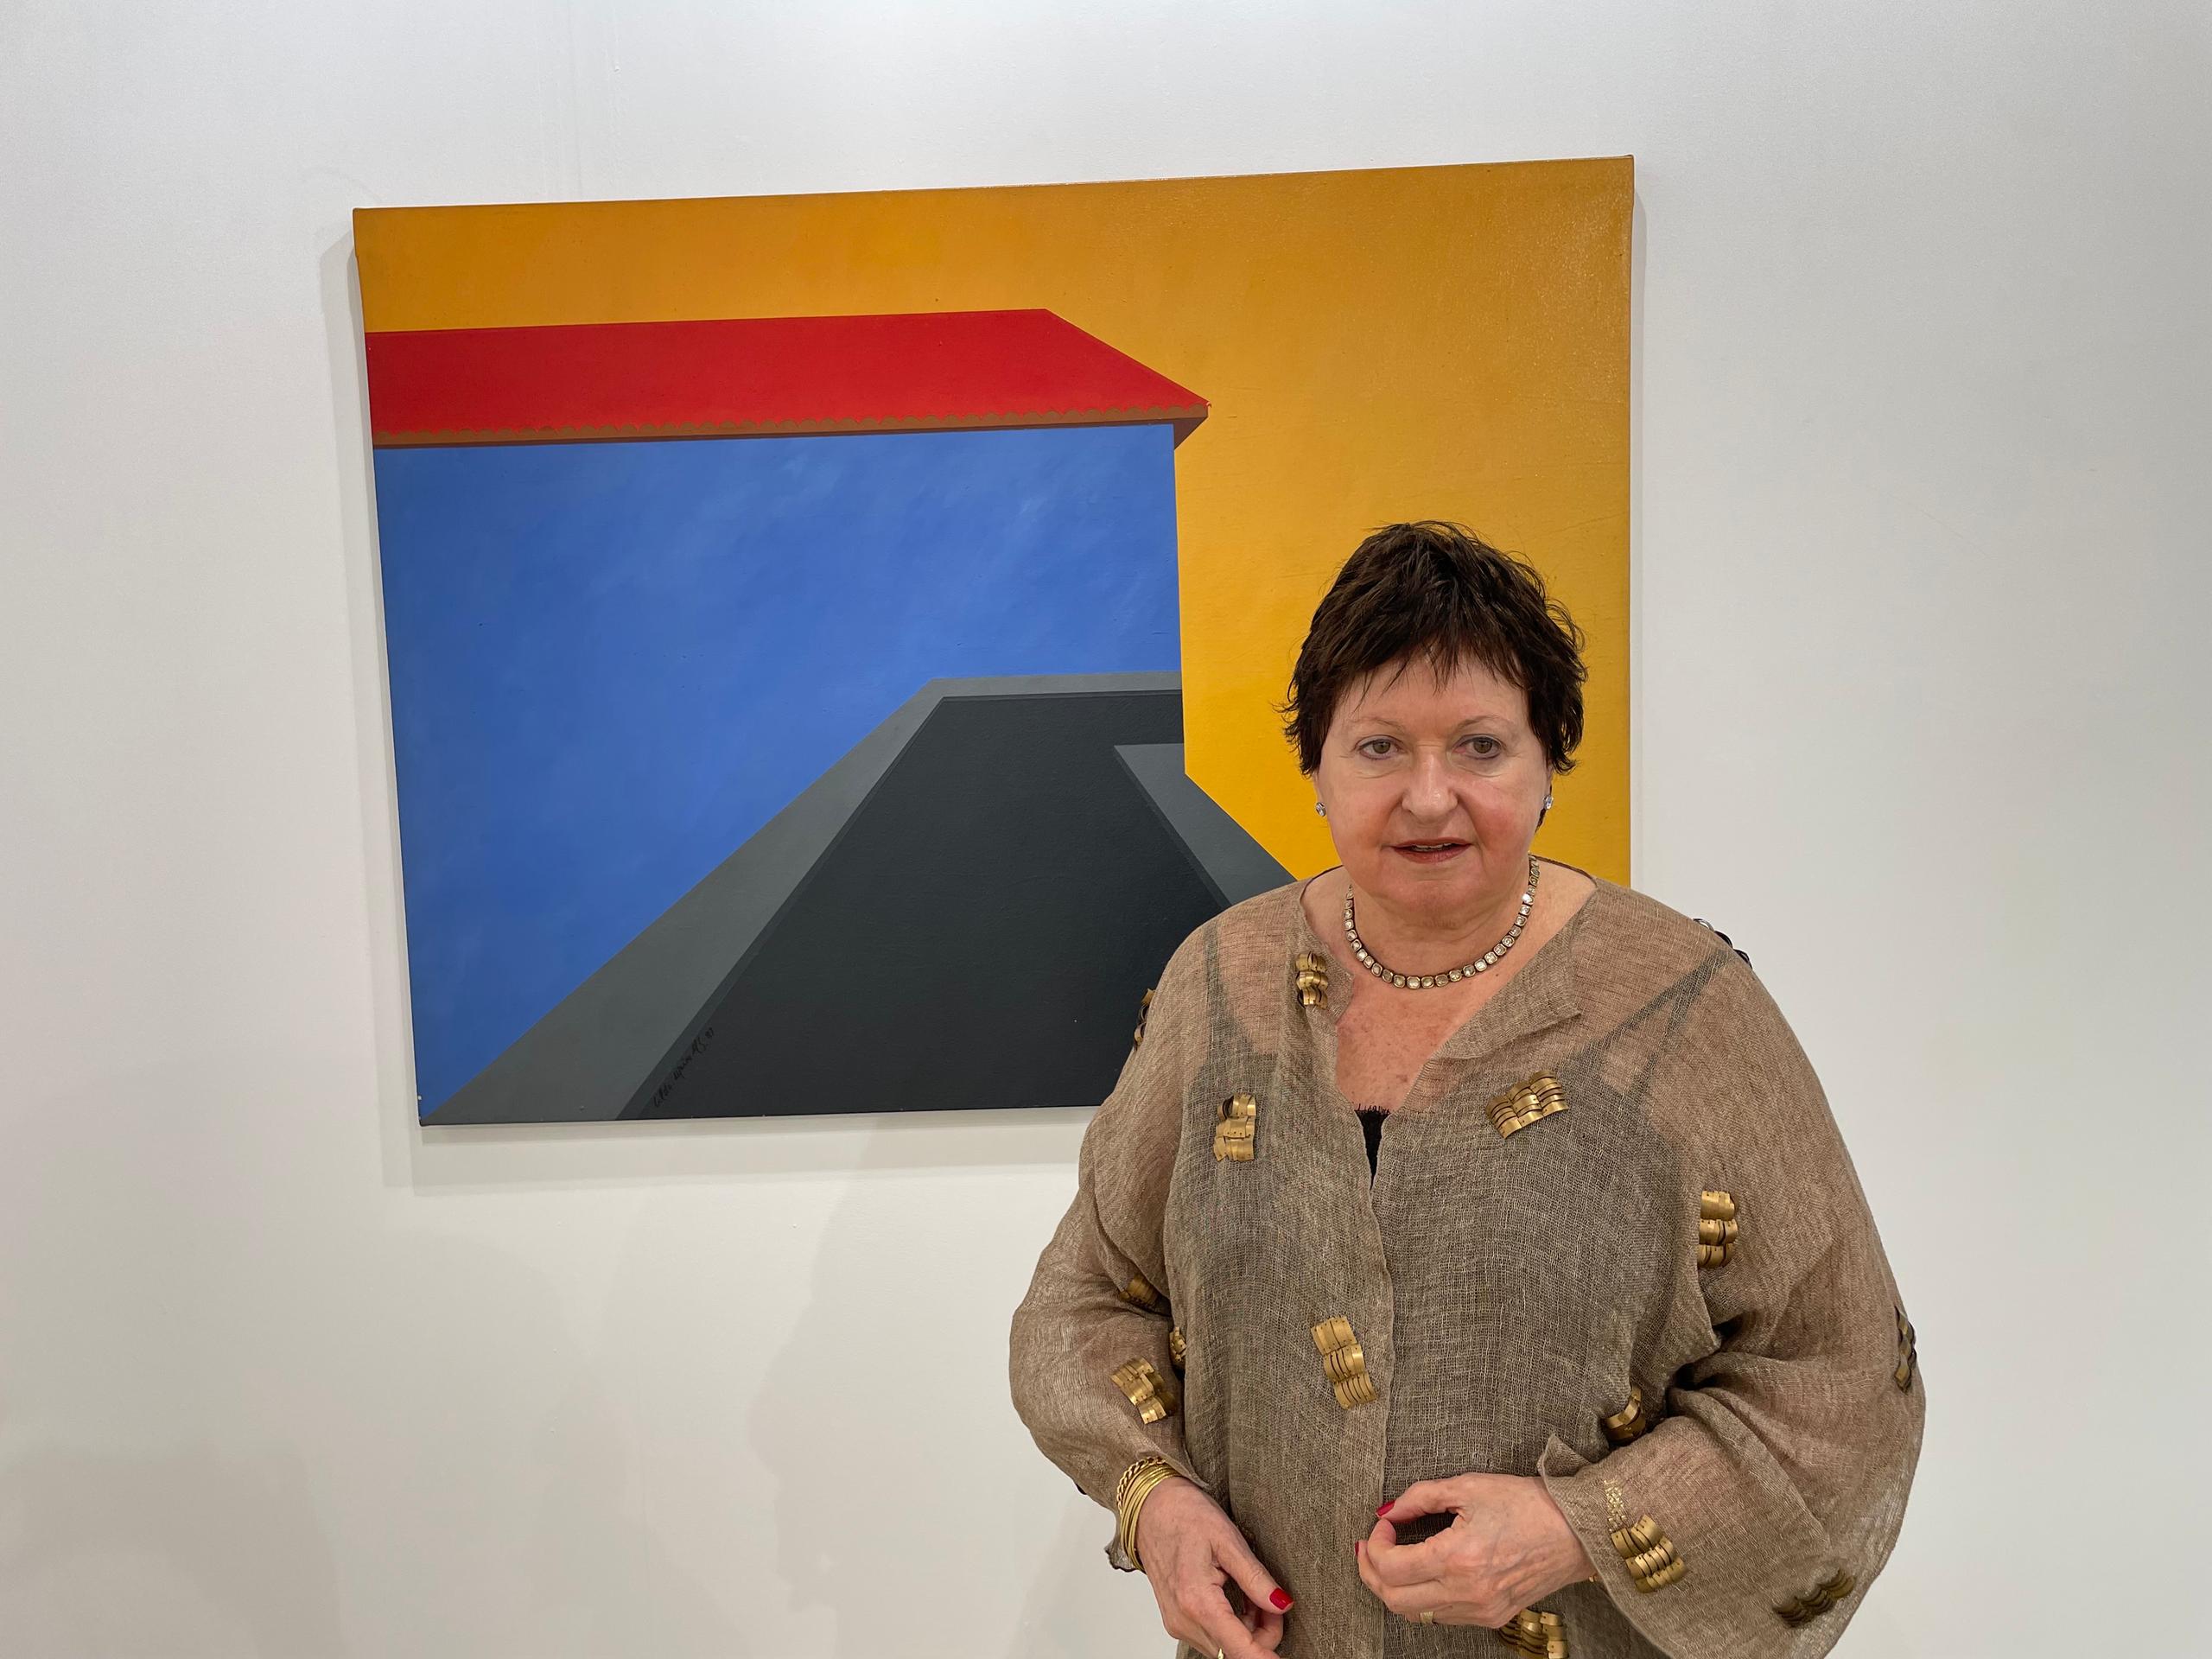 Brazilian gallerist Luisa Strina poses in front of a Cildo Meireles painting, in Basel